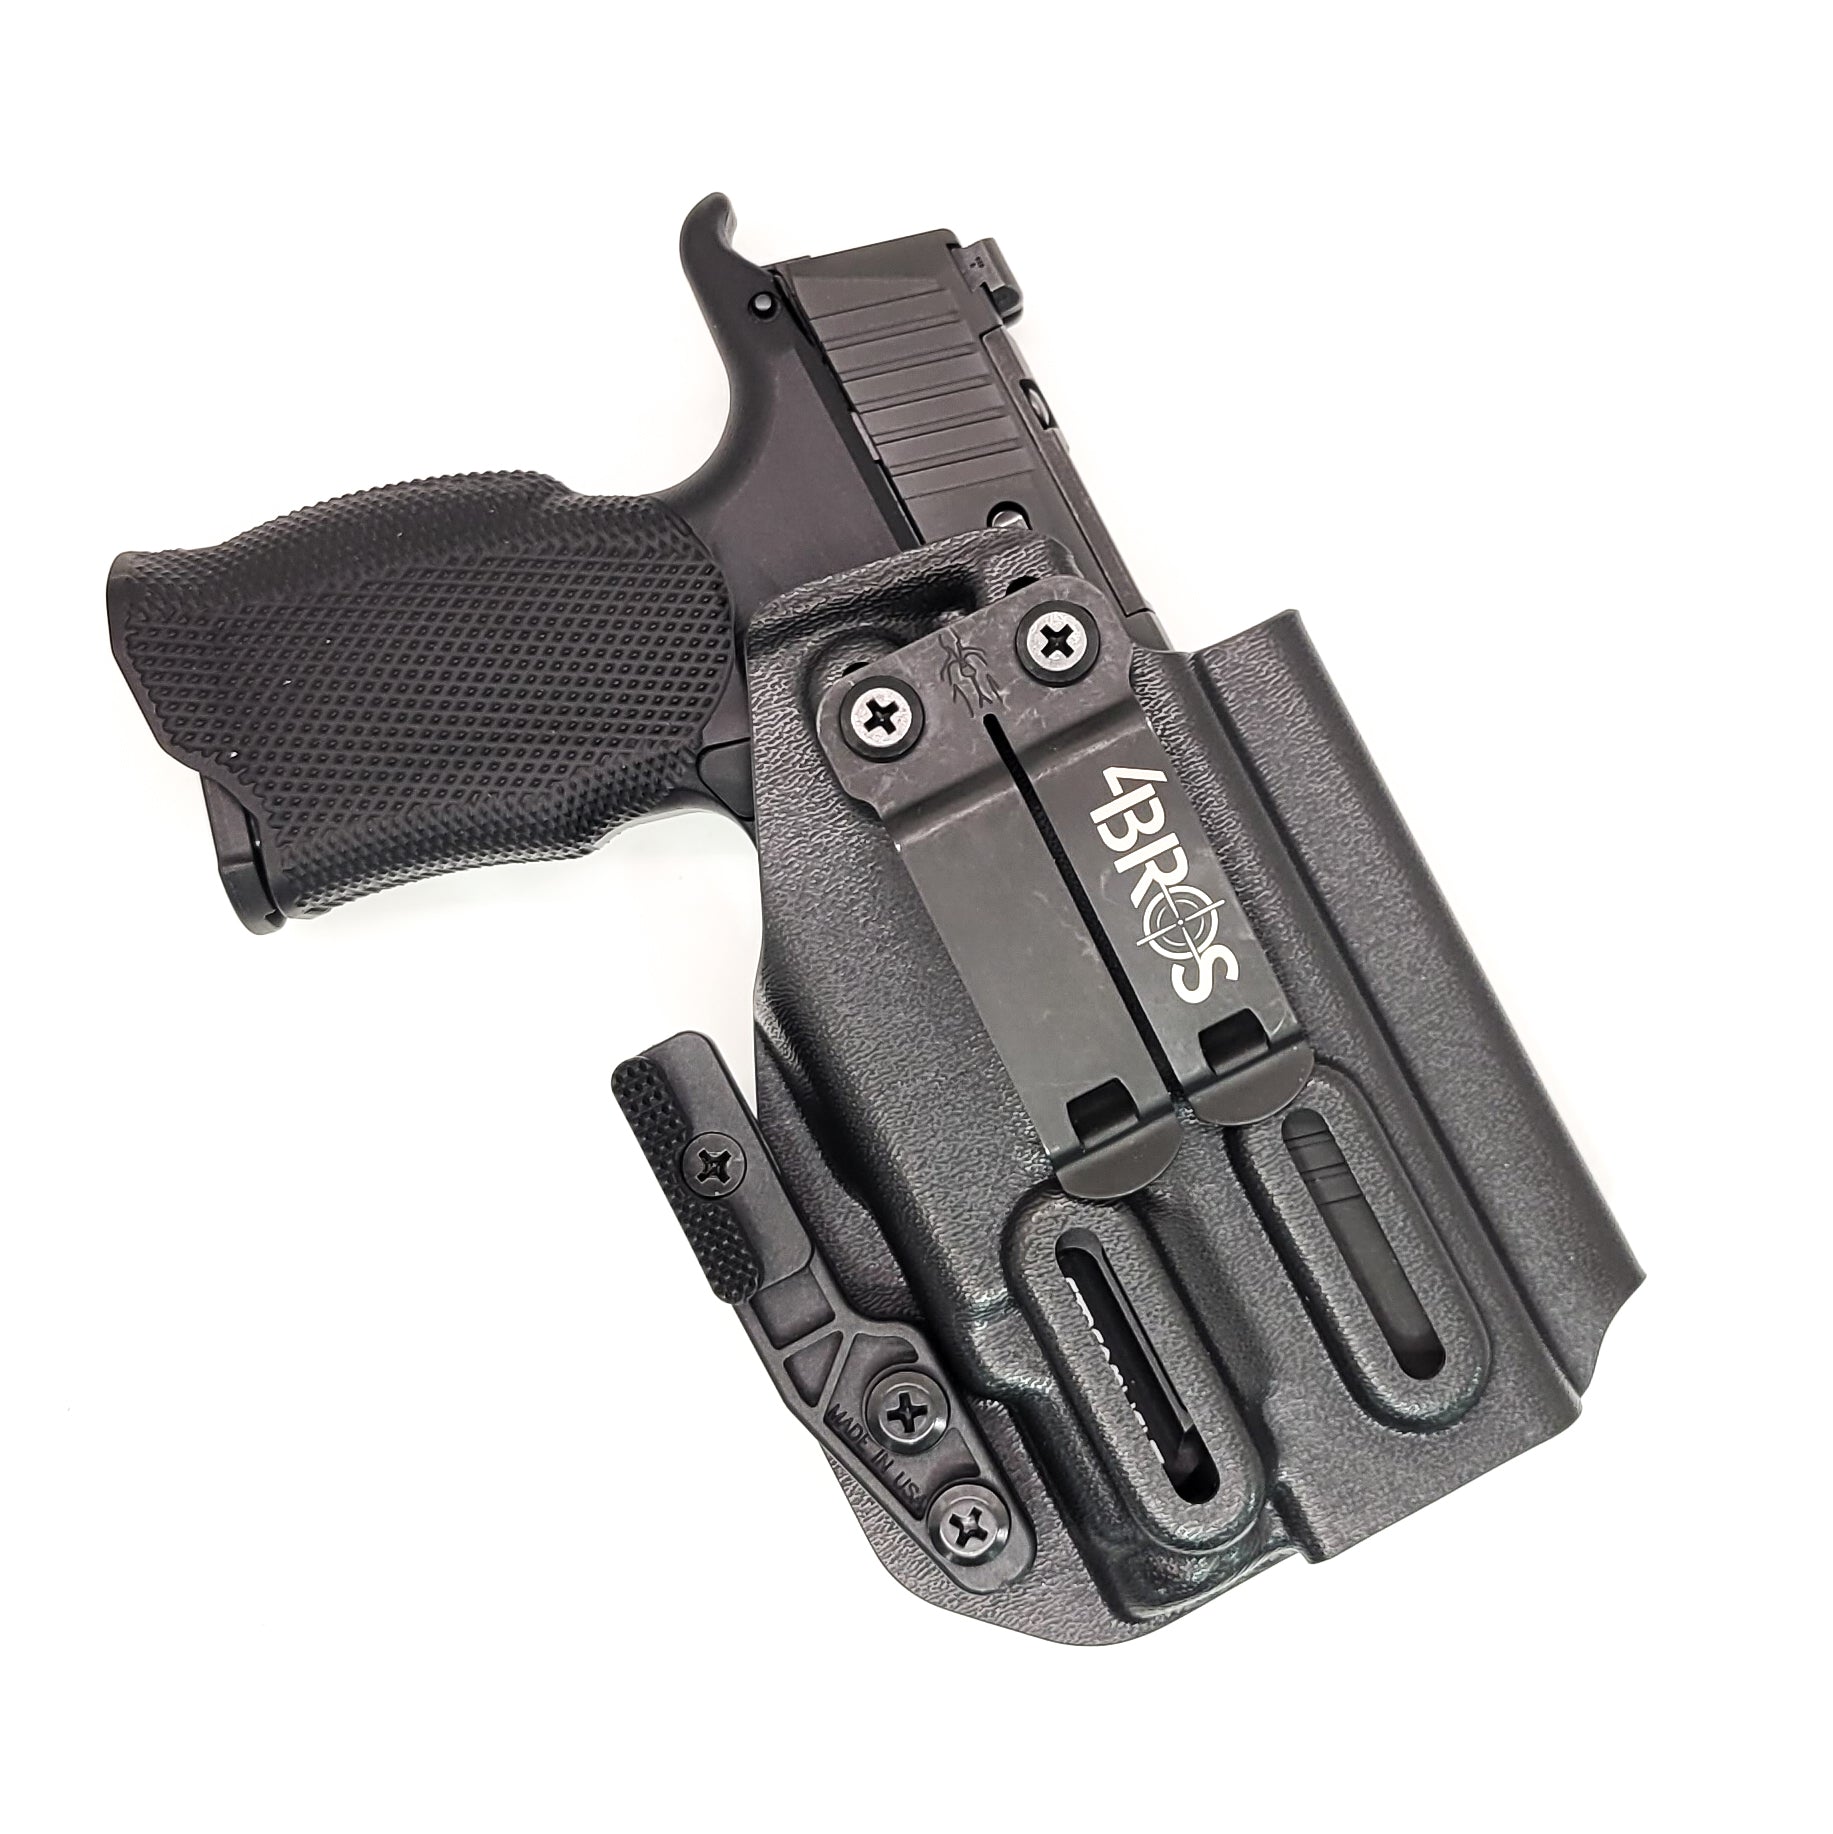 For the best IWB AIWB Inside Waistband Holster designed to fit the Sig Sauer P365-XMACRO with the Icarus Precision A.C.E. 365 "X" MACRO Grip Module and Streamlight 1913 version of the TLR-7 Sub, shop Four Brothers Holsters. Full sweat guard, Open muzzle for threaded barrels, cut for red dot sights. MACRO